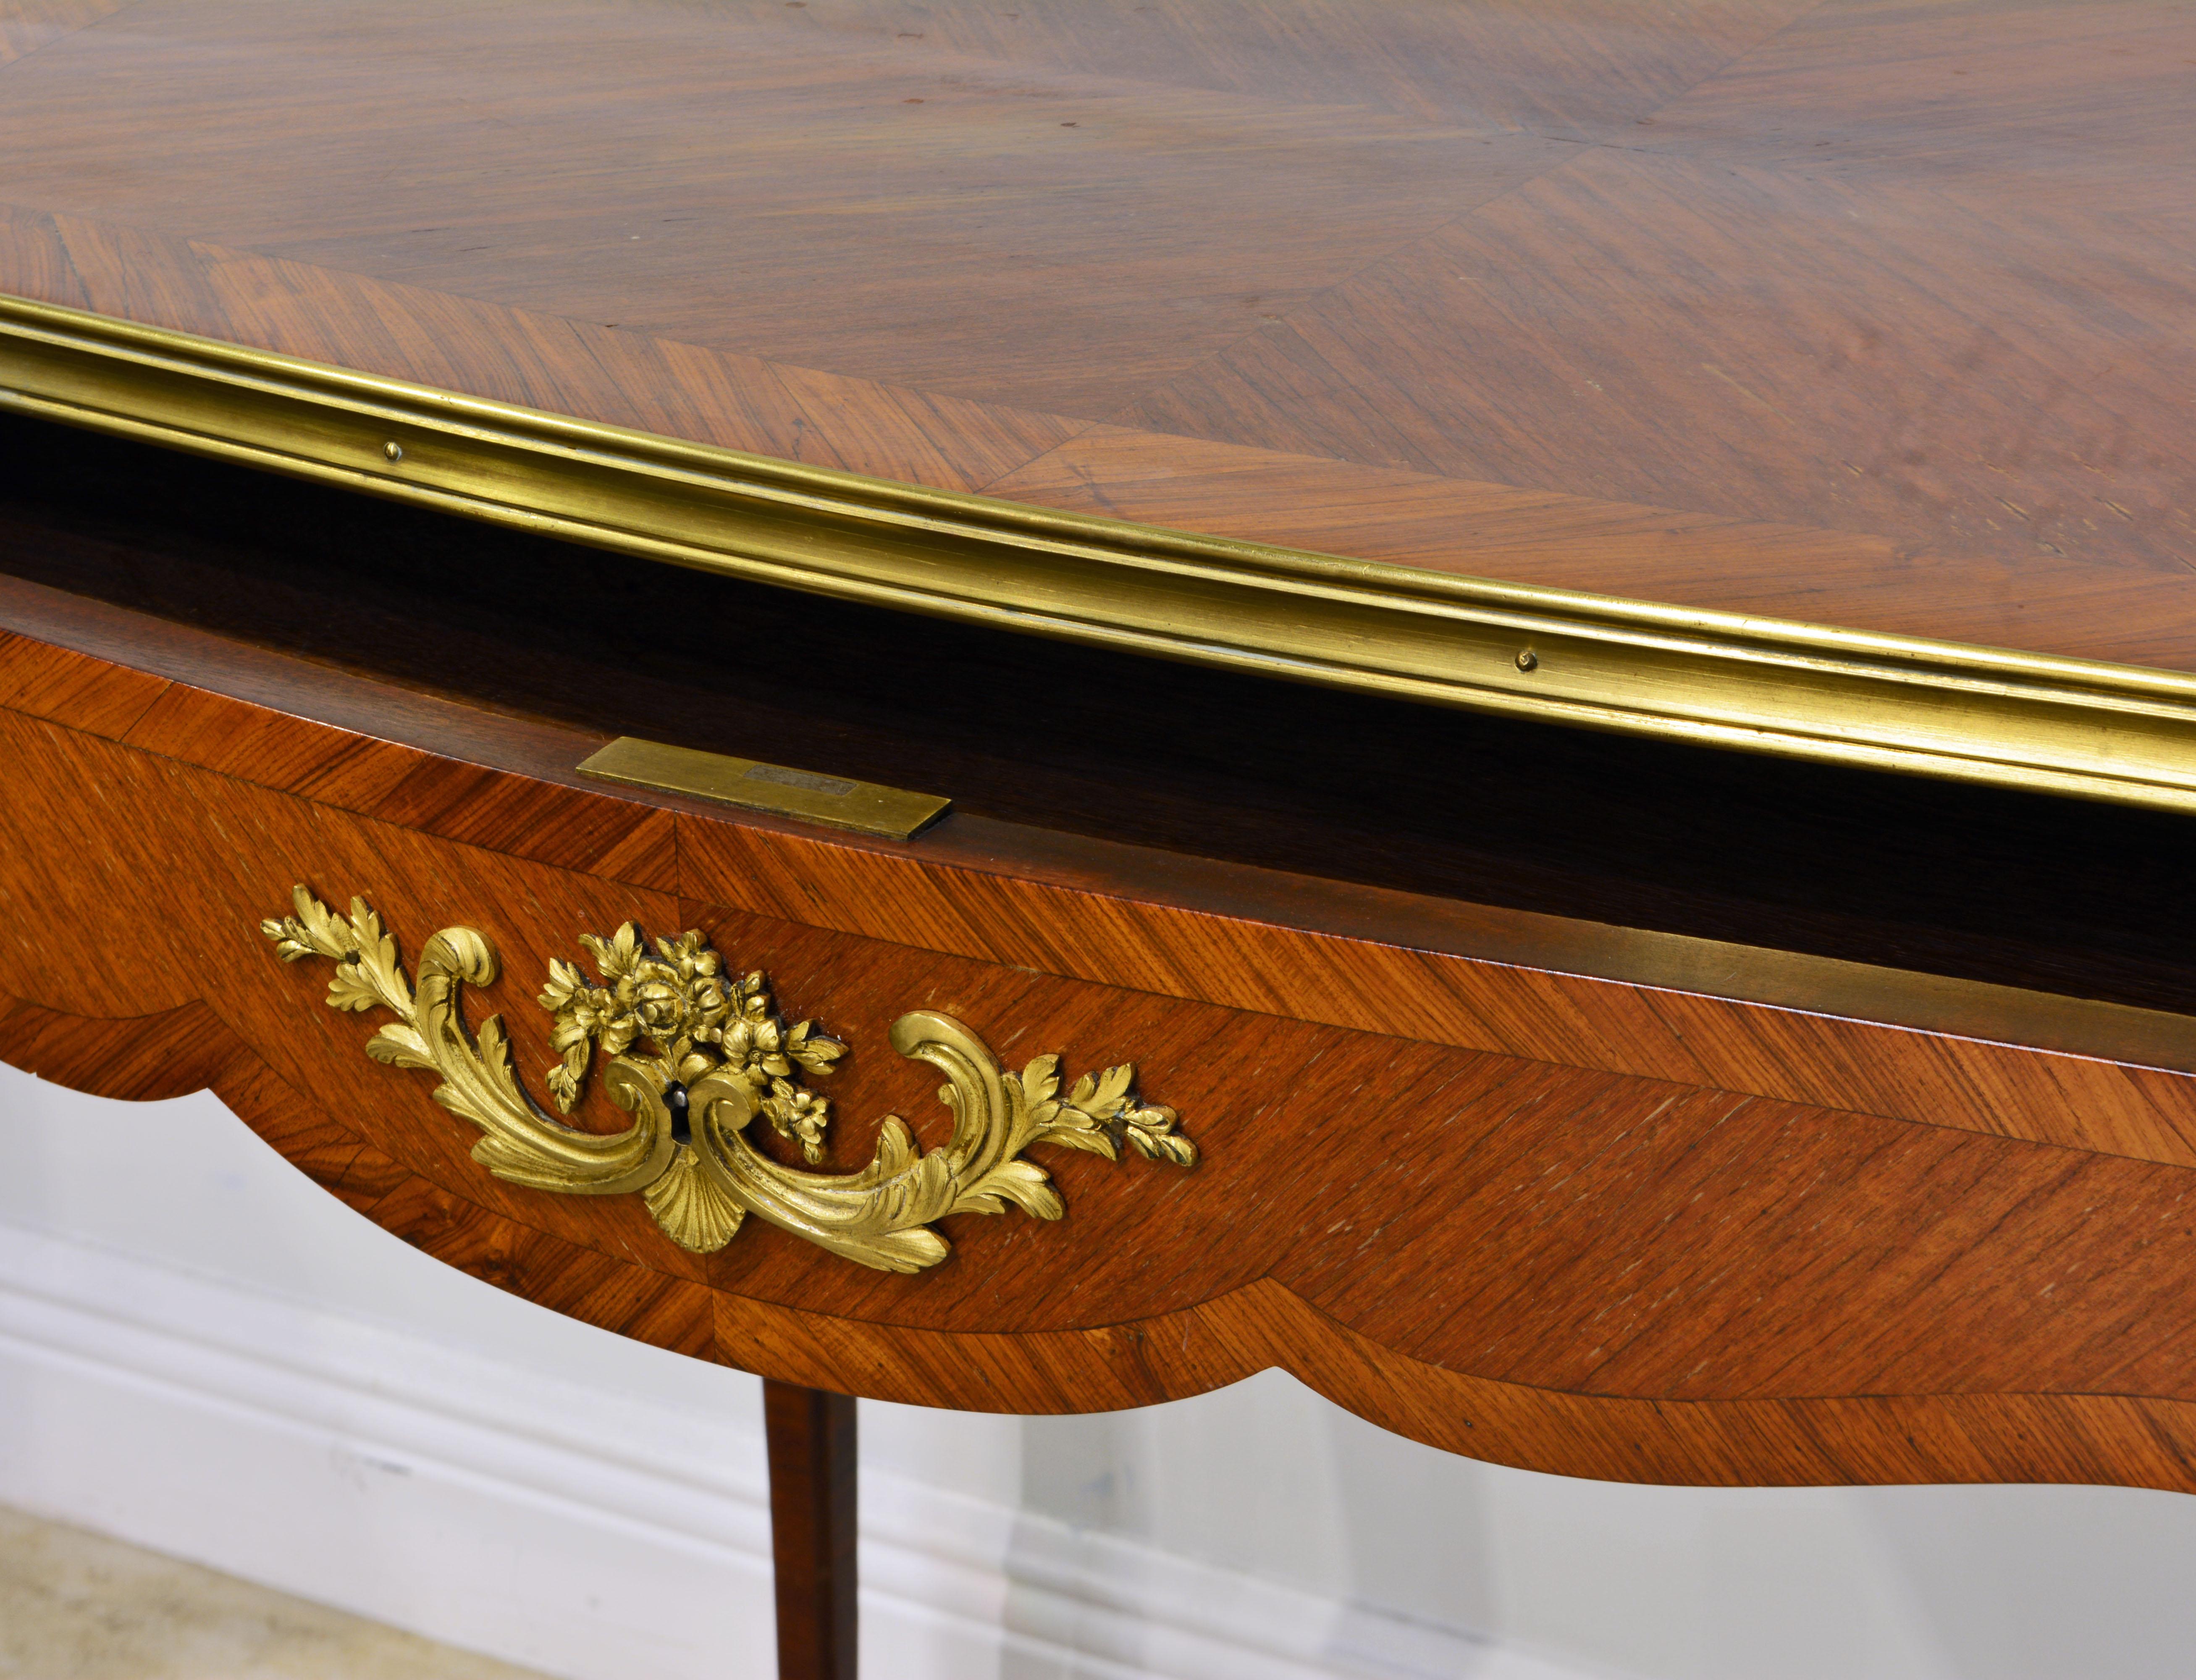 19th Century French Ormolu Mounted Louis XV Style Parquetry Table with Concealed Drawer